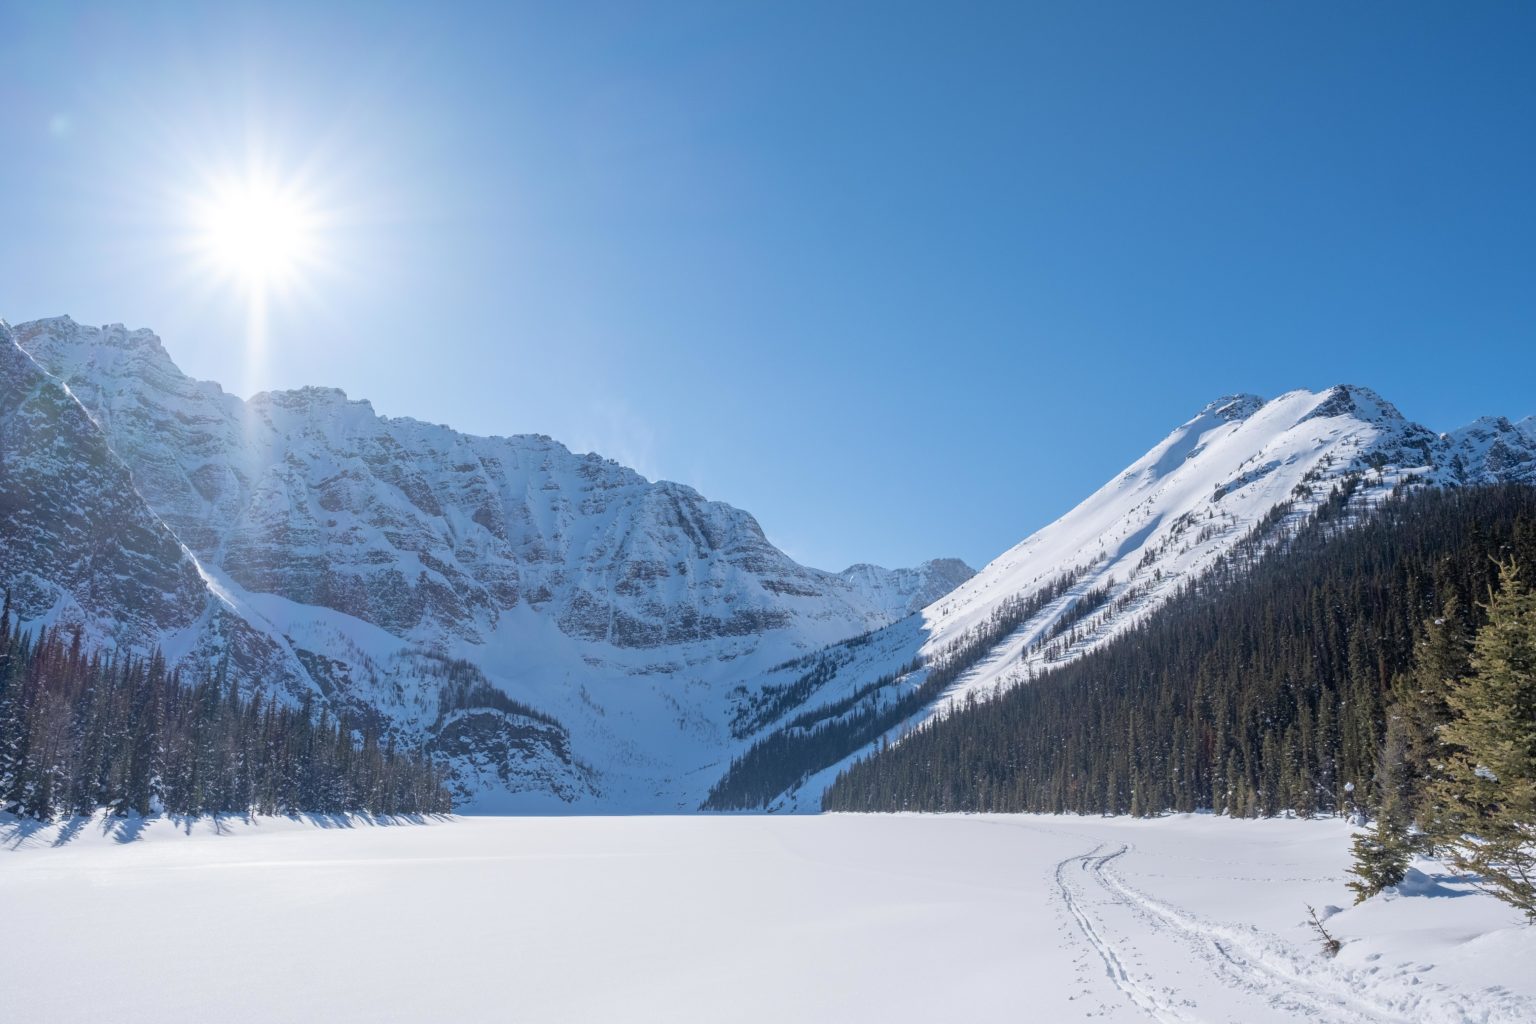 Visiting Banff in March? Here are 10 Helpful Things to Know and Do